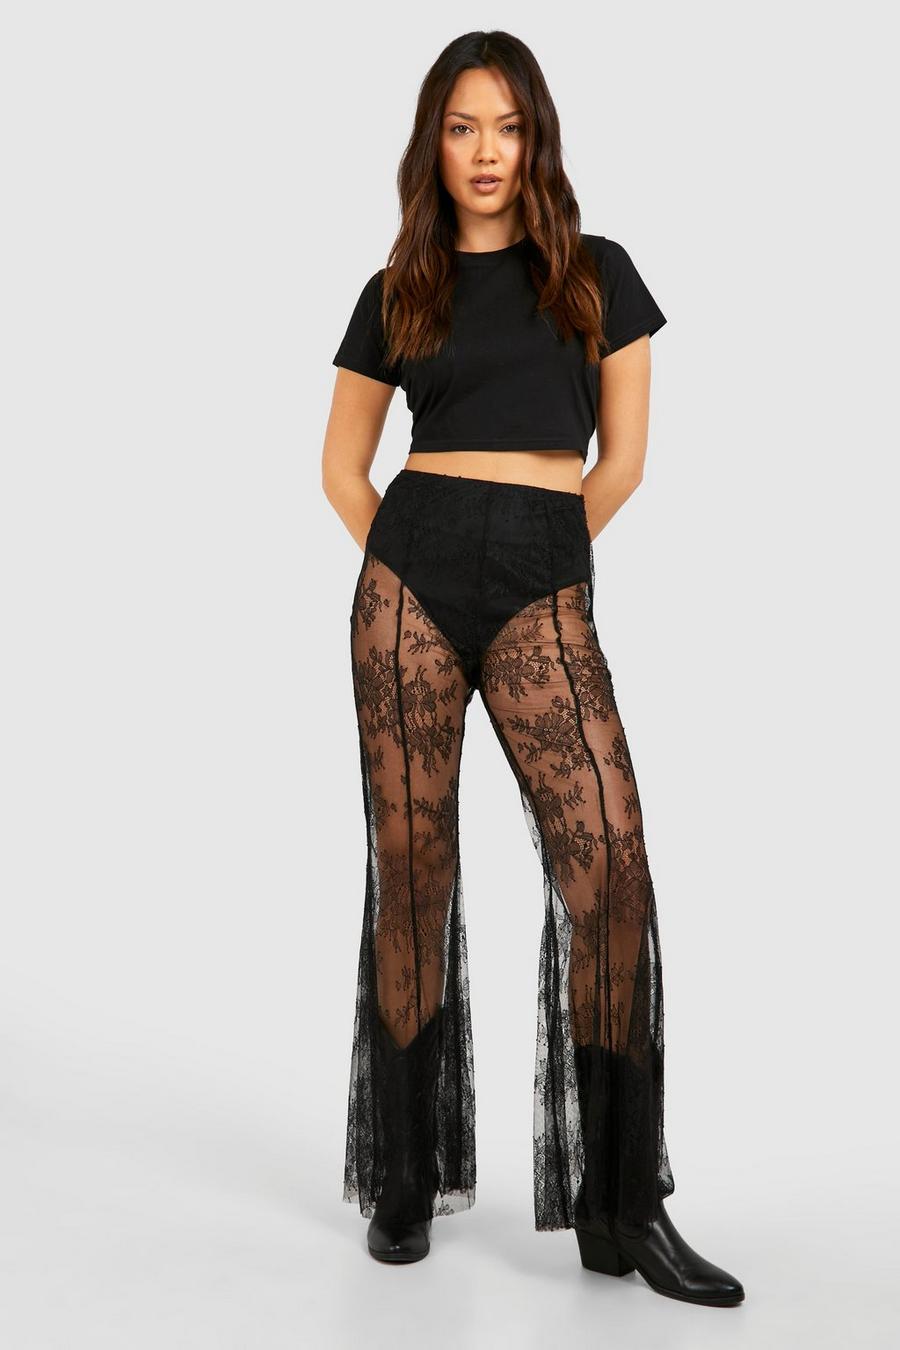 Black Sheer Lace Flare Trouser